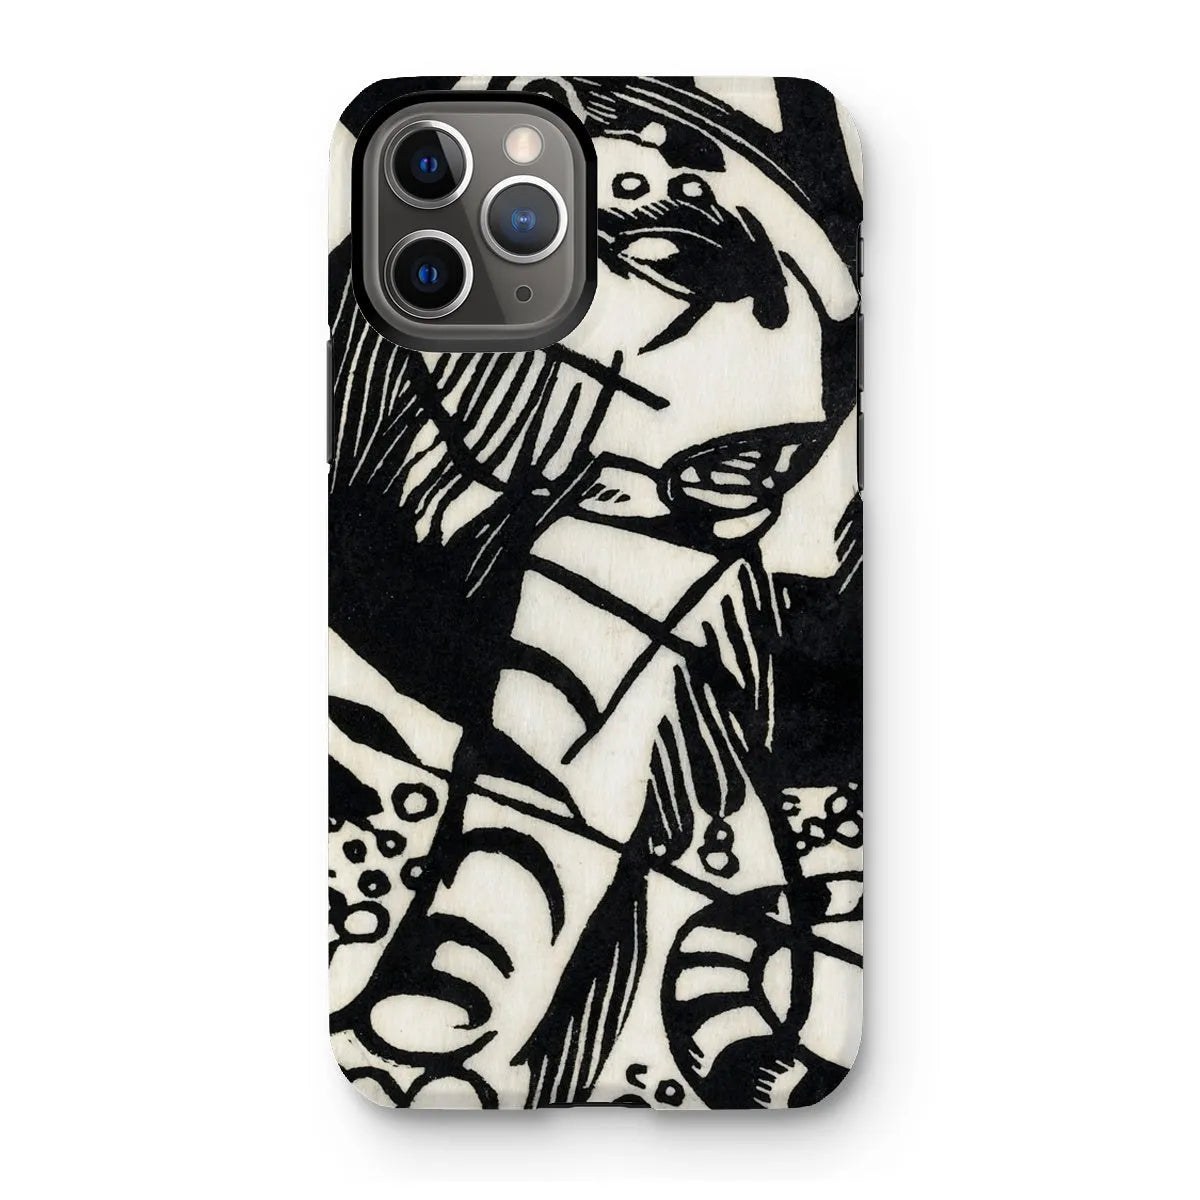 Tiger - Animal Aesthetic Phone Case - Franz Marc - Iphone 11 Pro / Matte - Mobile Phone Cases - Aesthetic Art